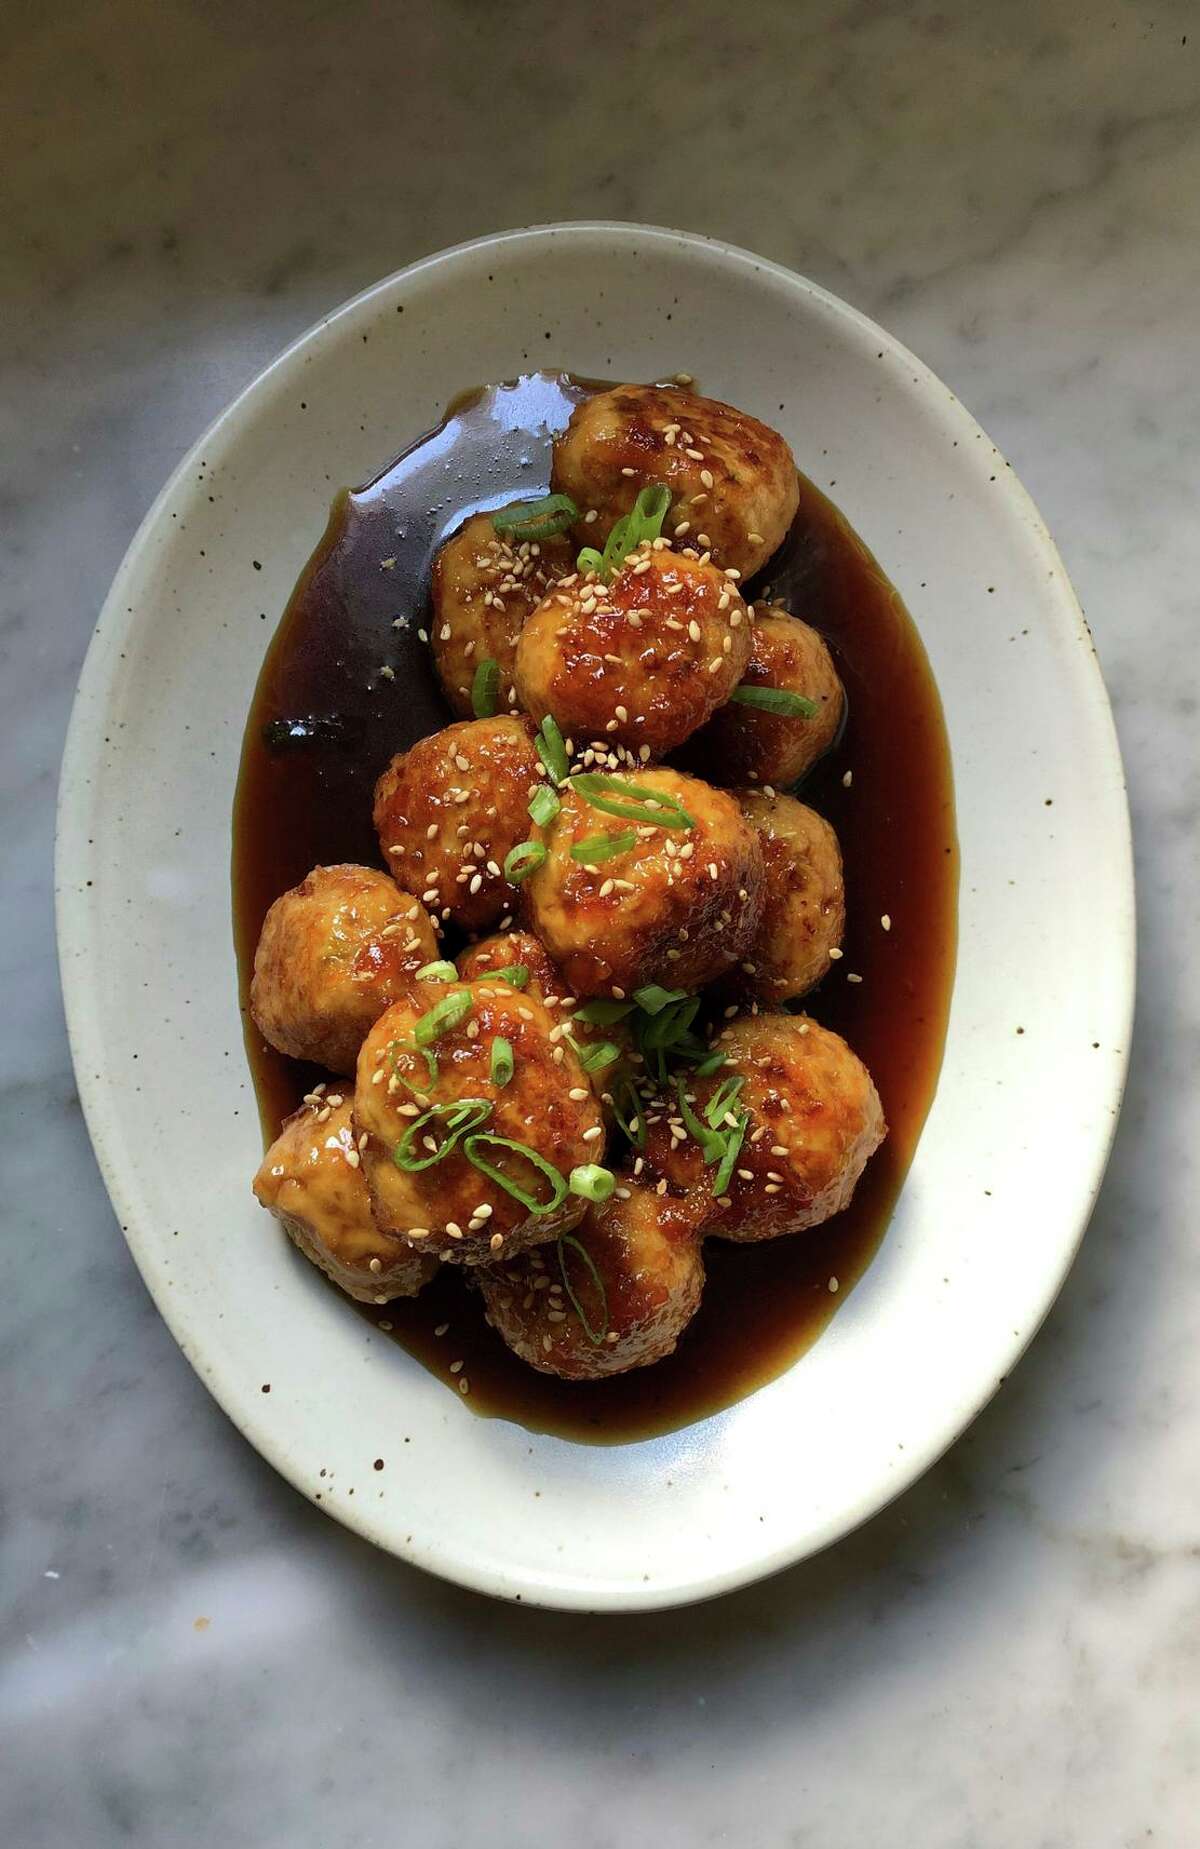 Chicken meatballs are bathed in a four-ingredient glaze that includes light-bodied soy sauce and orange marmalade.